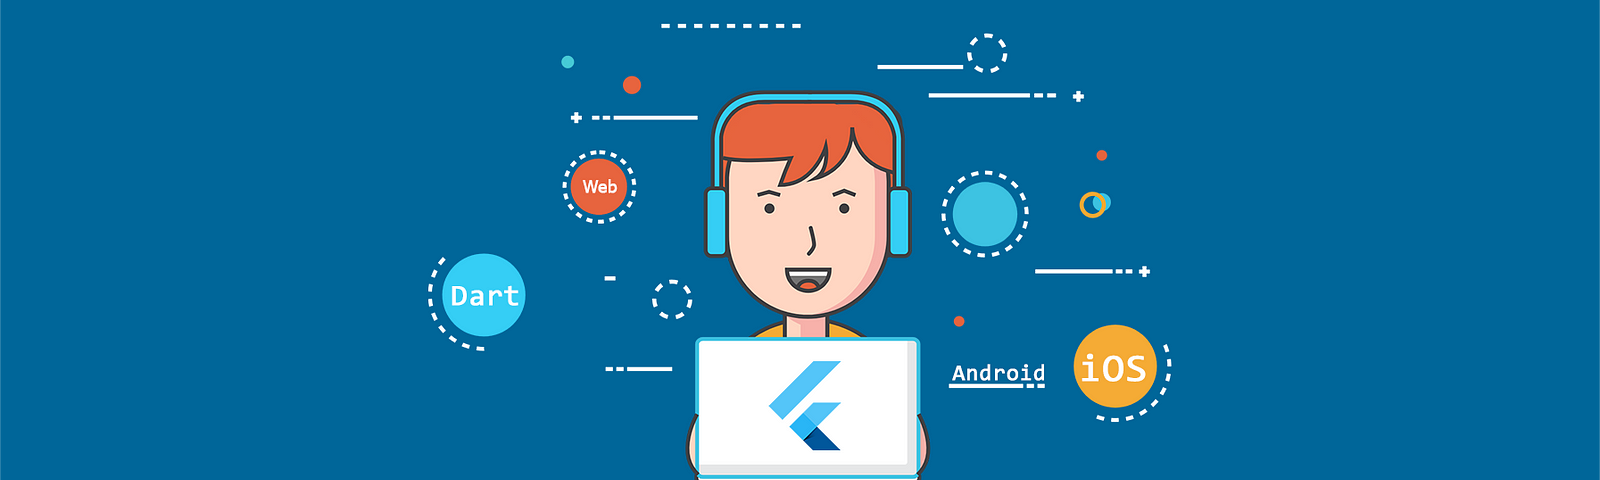 How to learn flutter